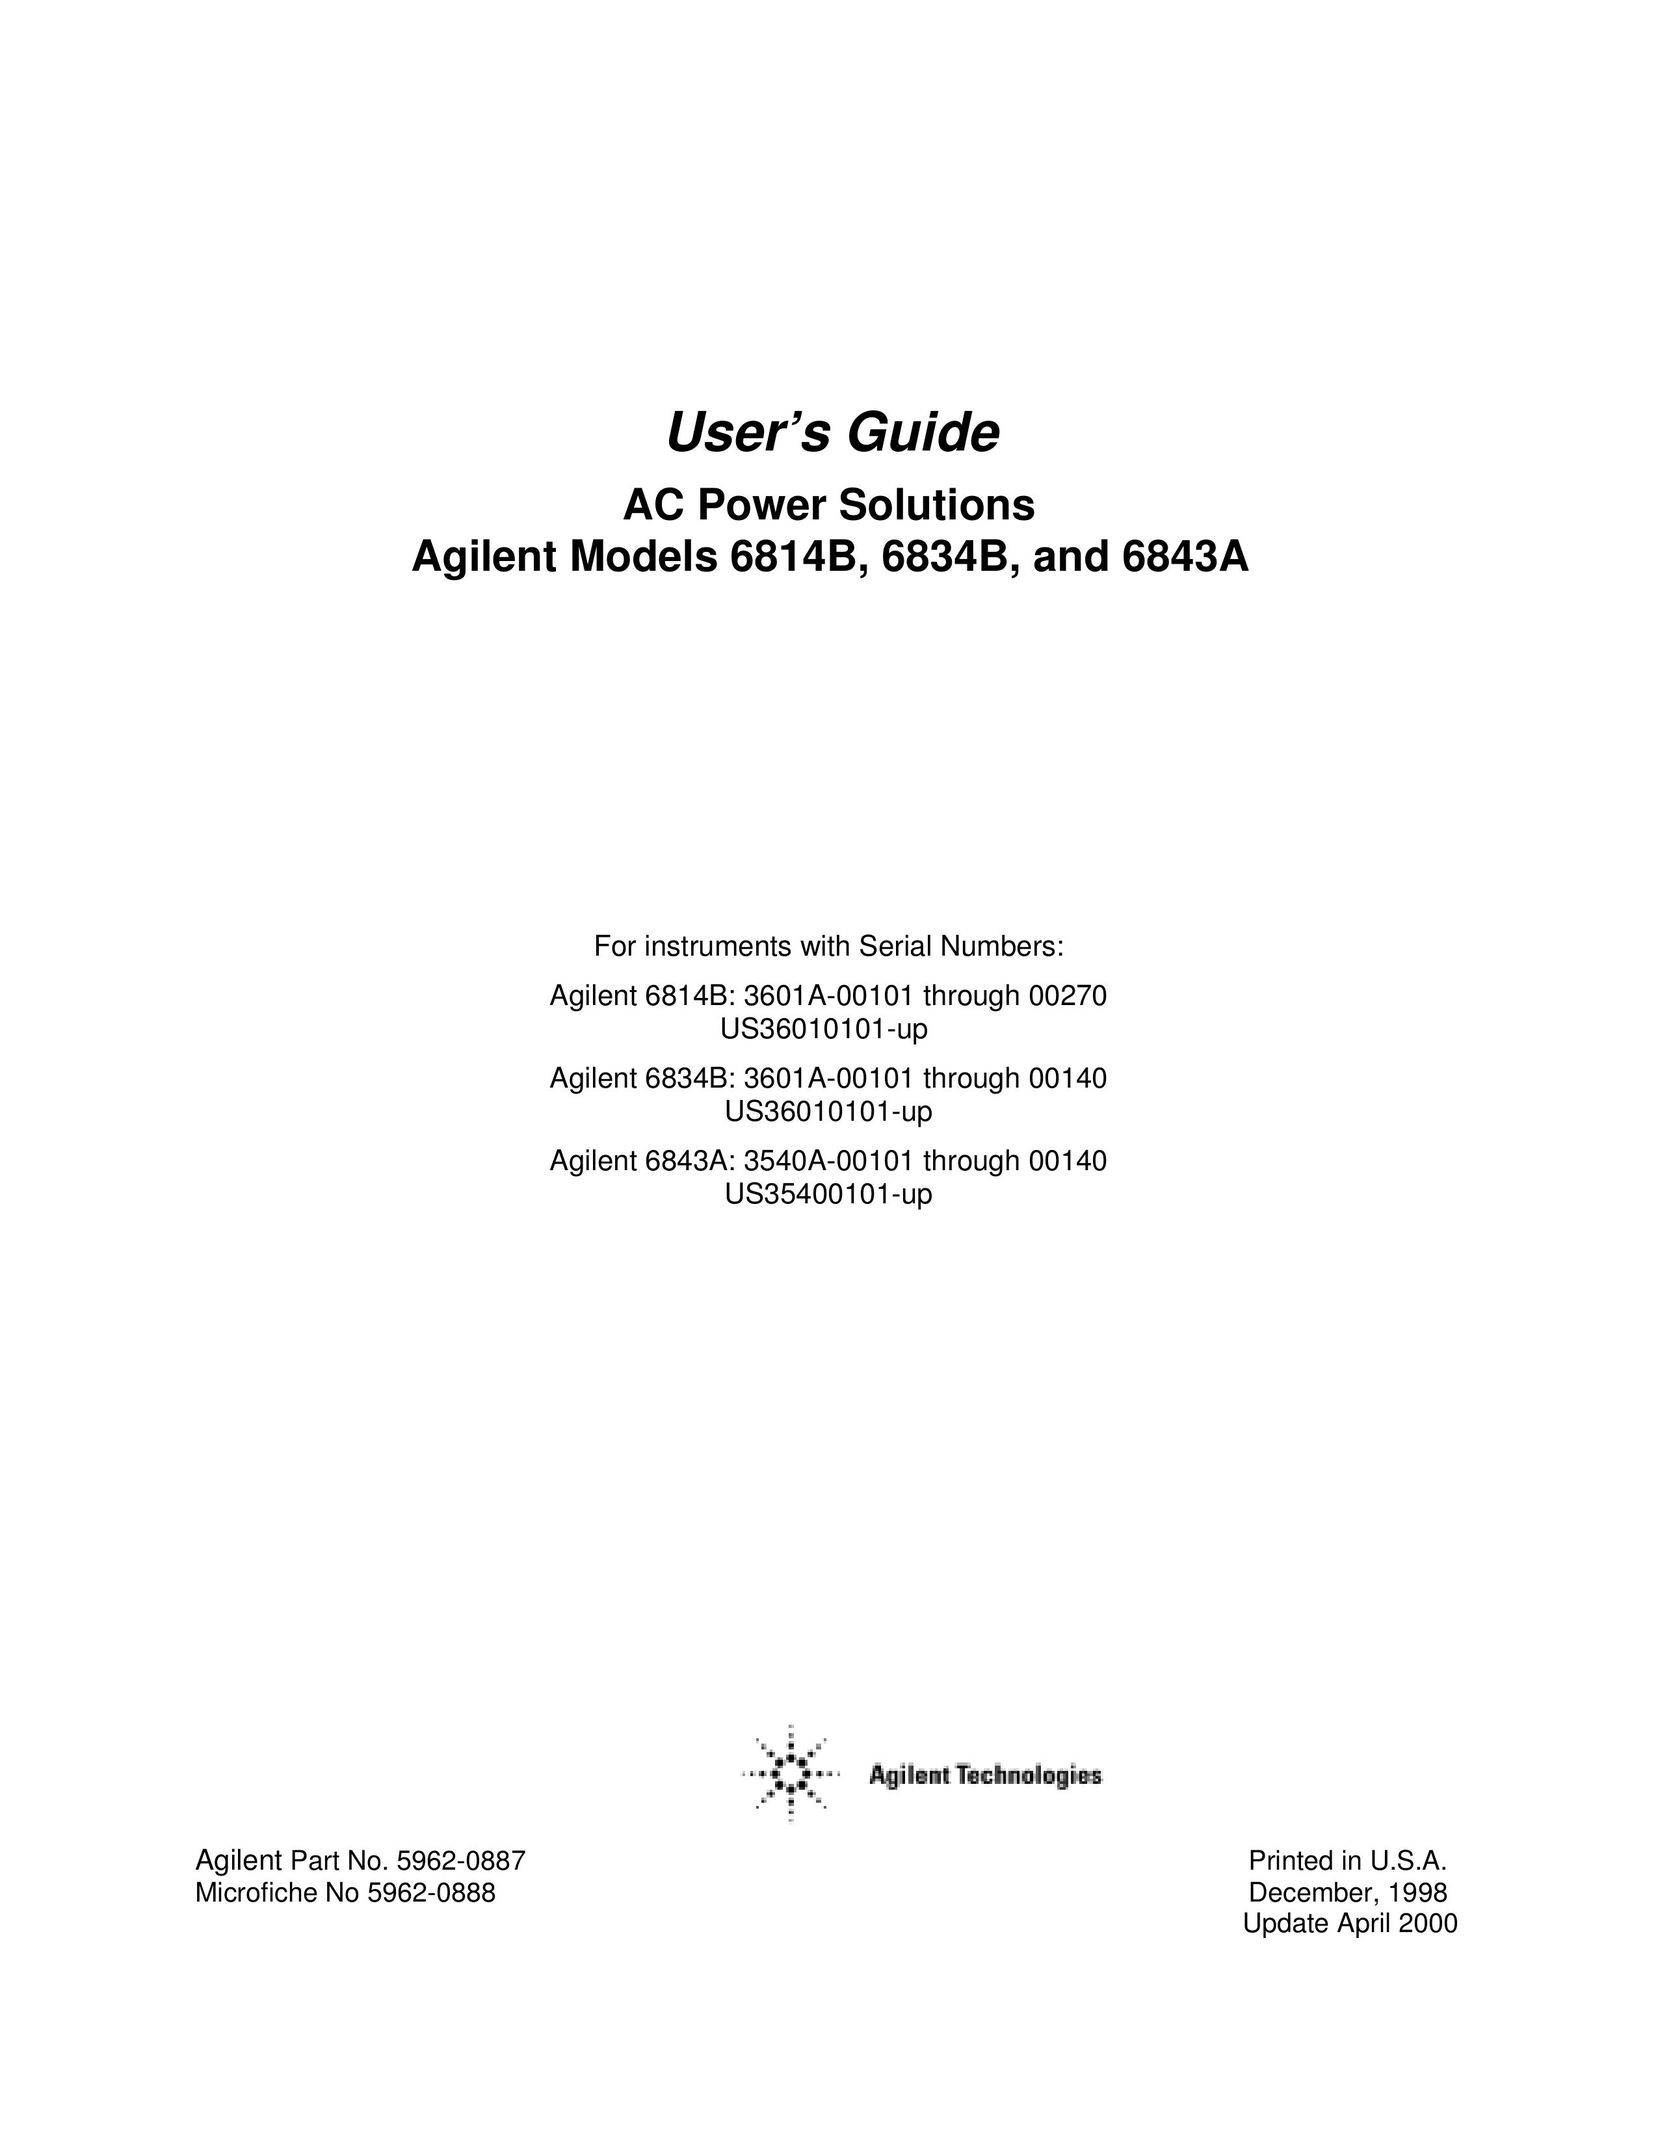 Agilent Technologies 6843A Air Conditioner User Manual